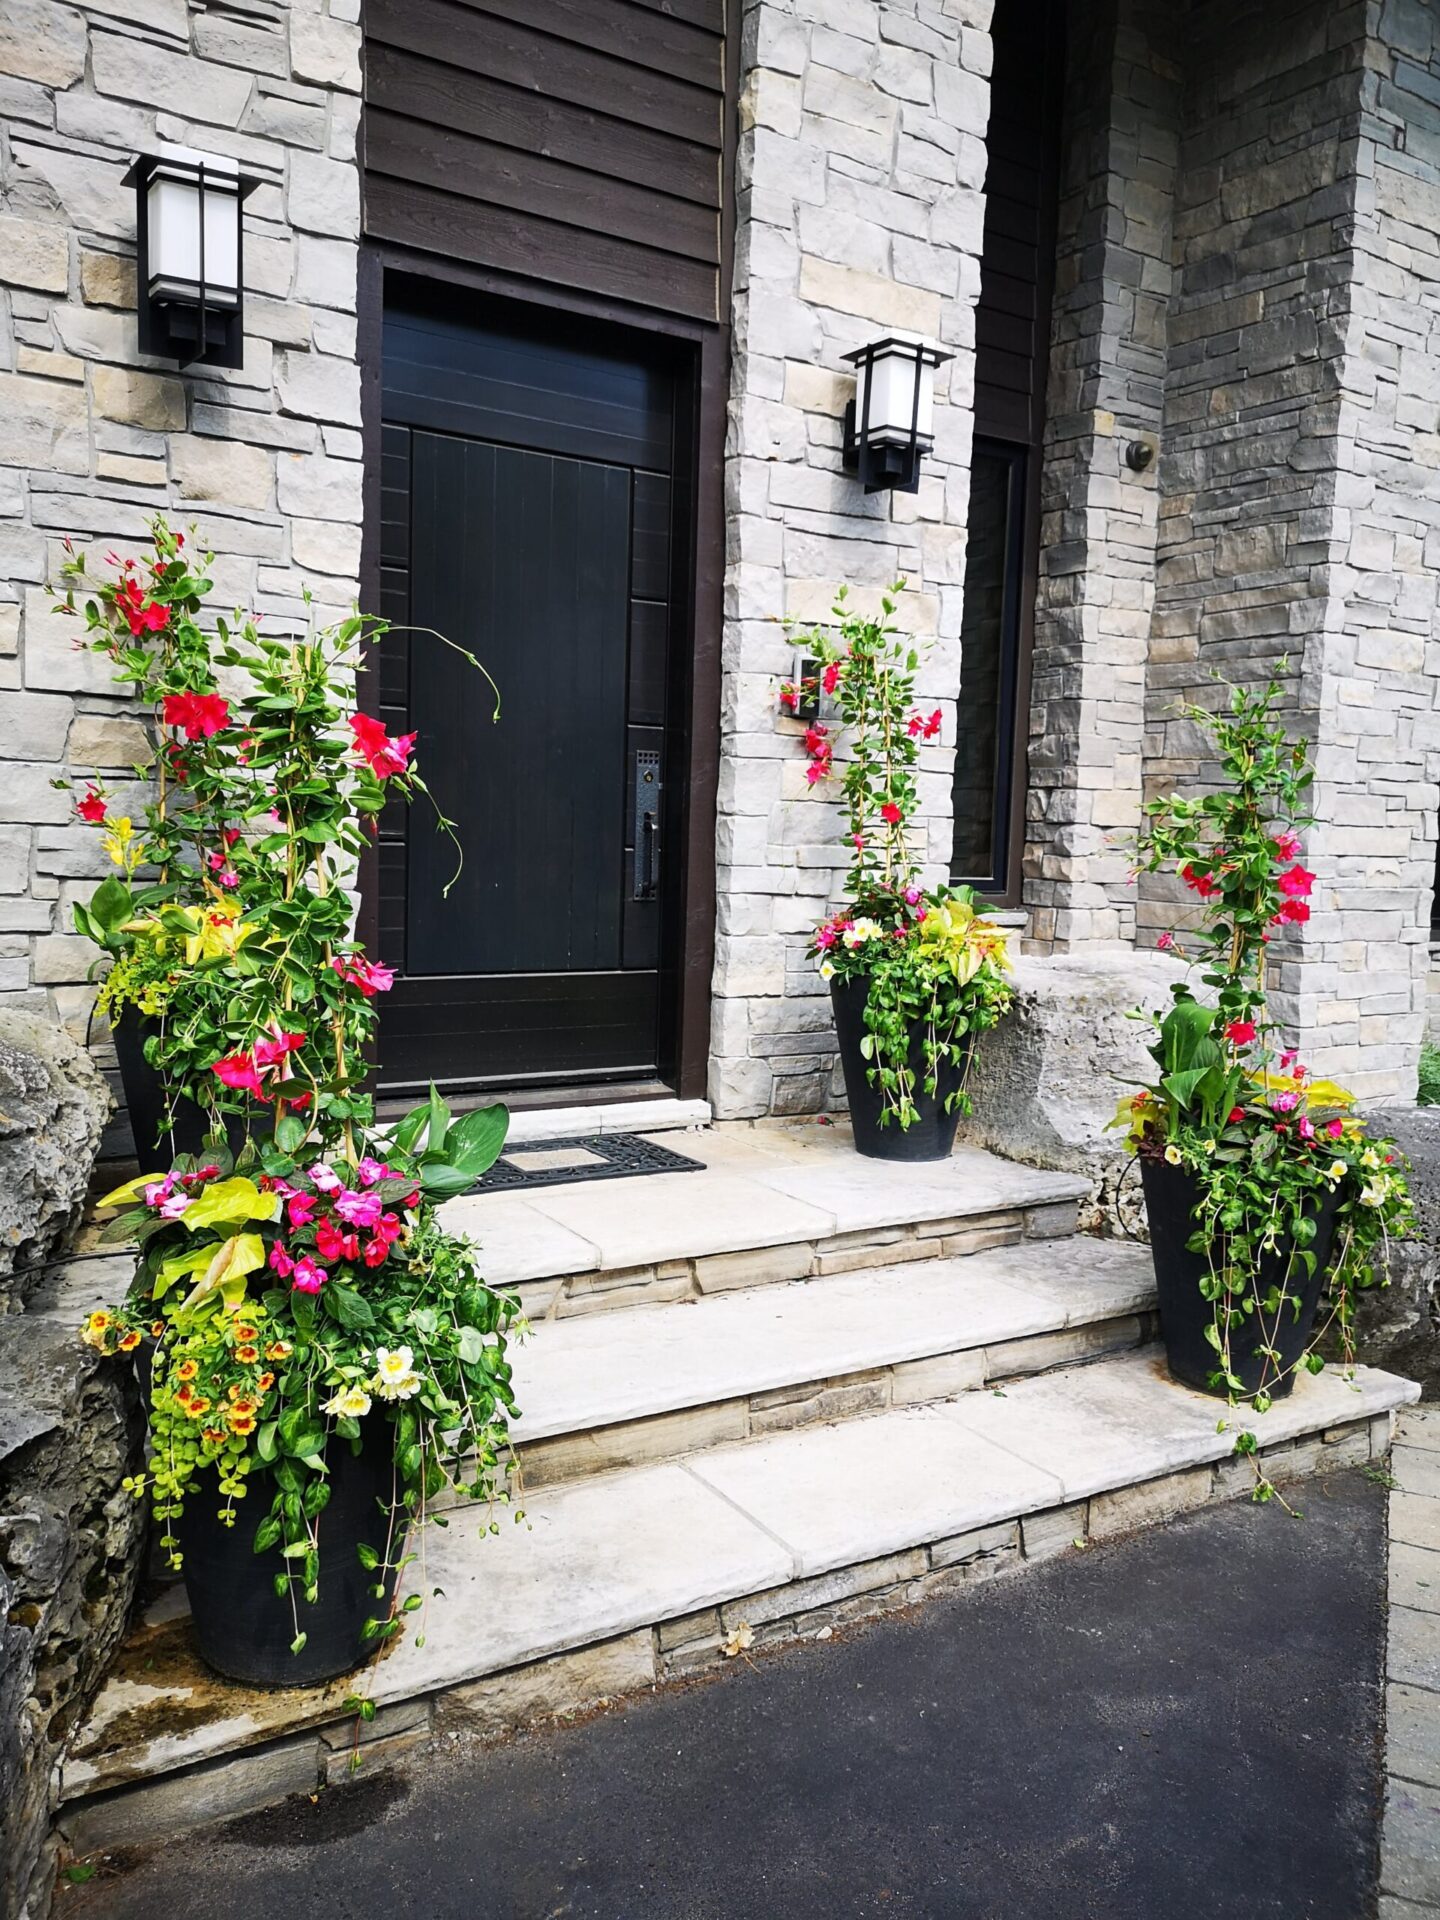 The image shows a house entrance with a dark door, stone facade, outdoor lights, and vibrant flowering plants in pots on either side of steps.